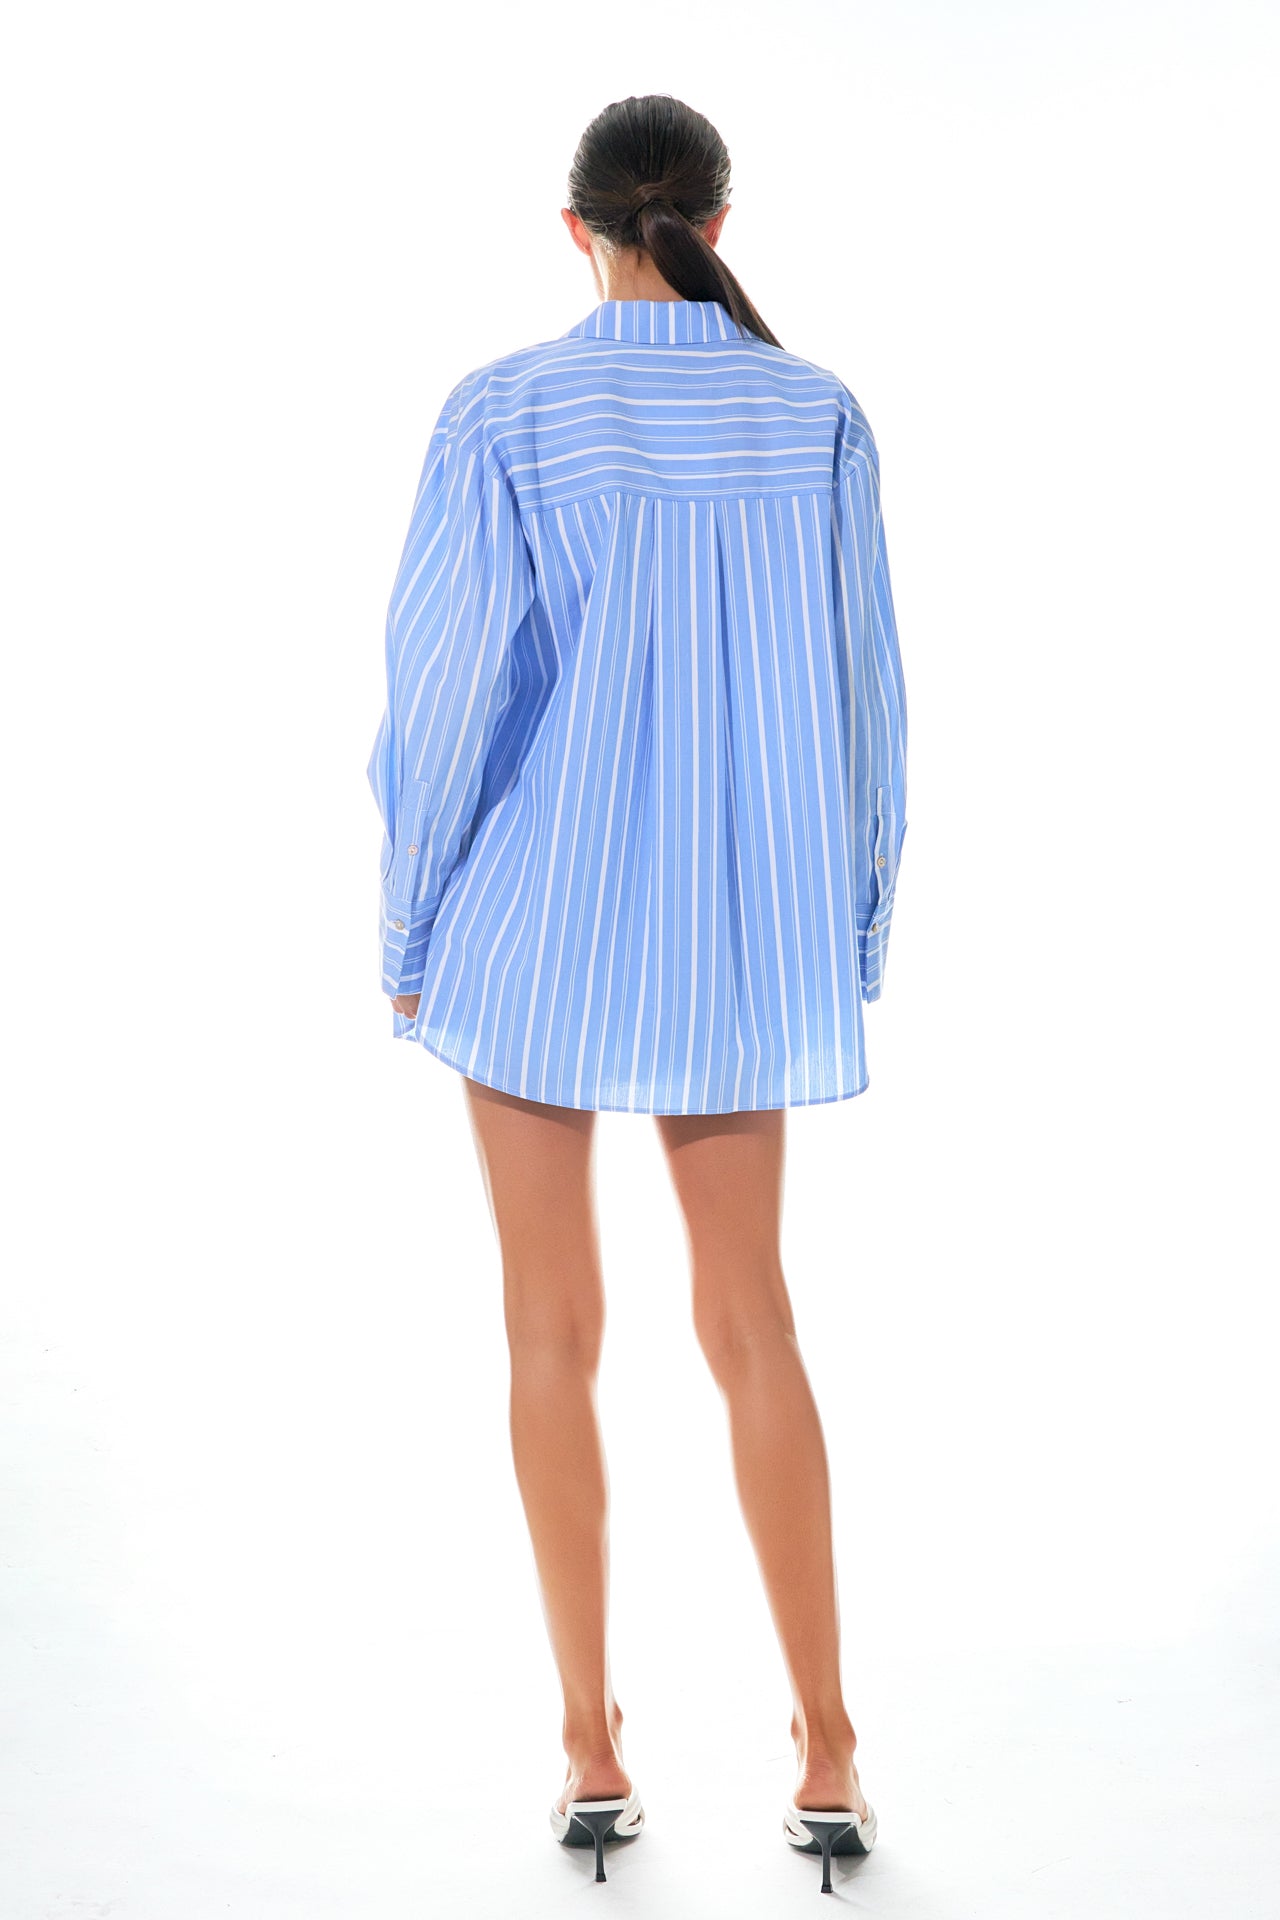 GREY LAB - Striped Oversized Shirt - SHIRTS & BLOUSES available at Objectrare